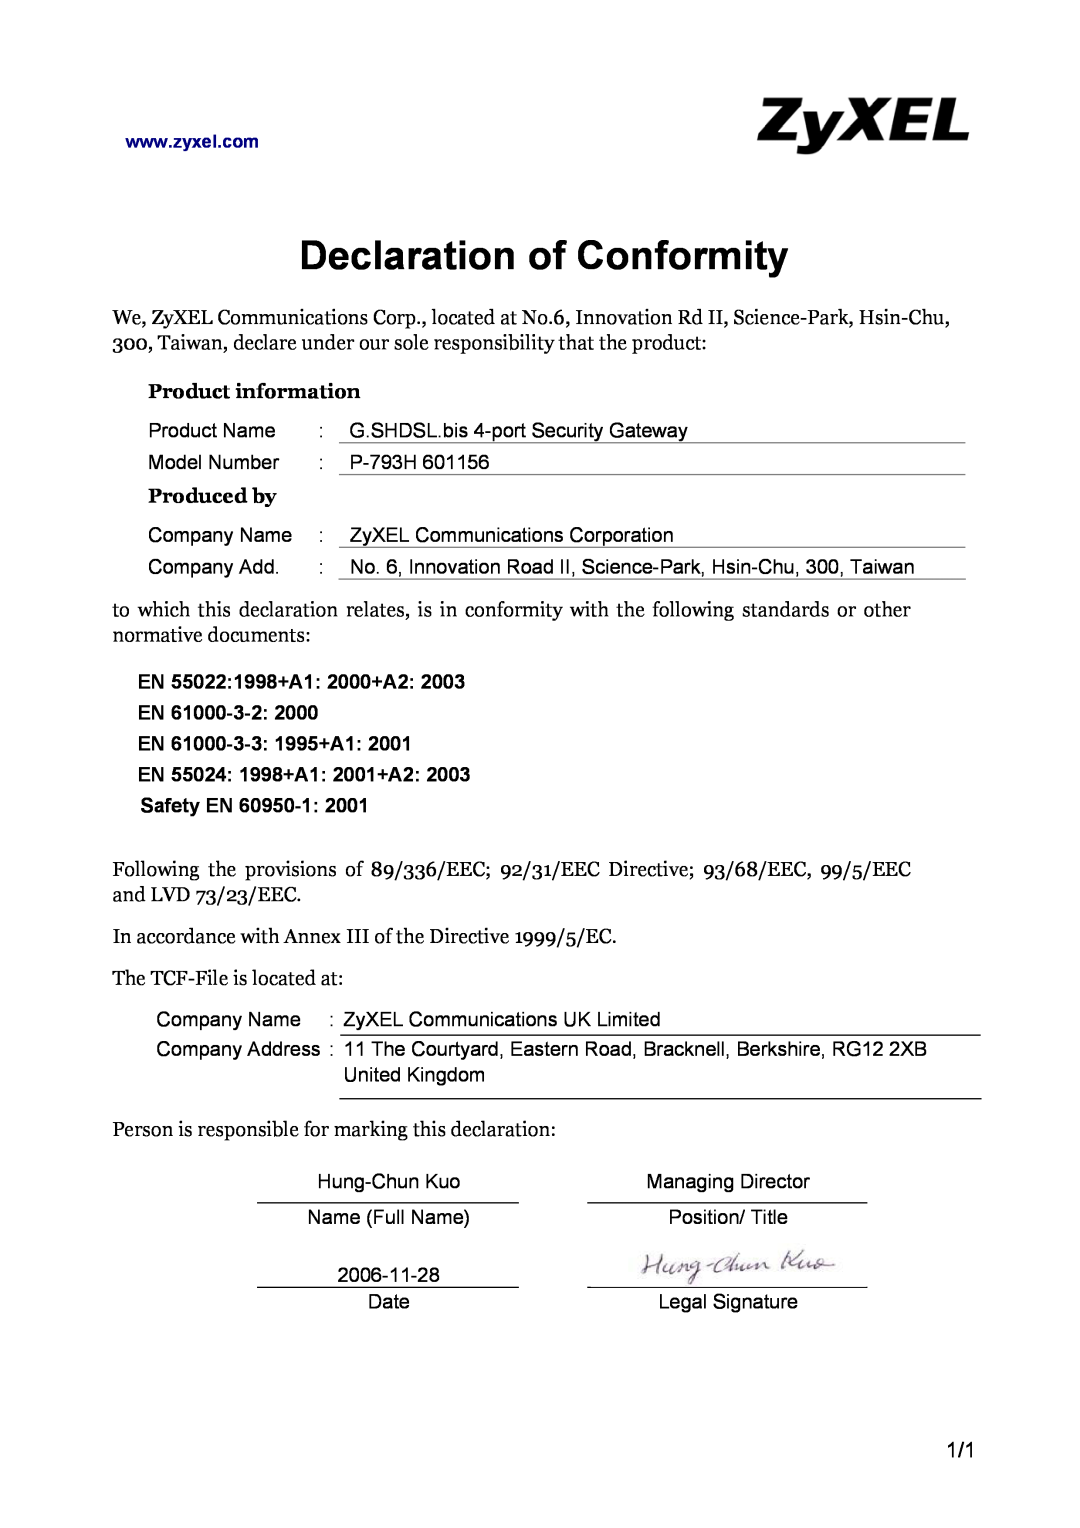 ZyXEL Communications P-793H 601156 manual Declaration of Conformity, Product information, Produced by 